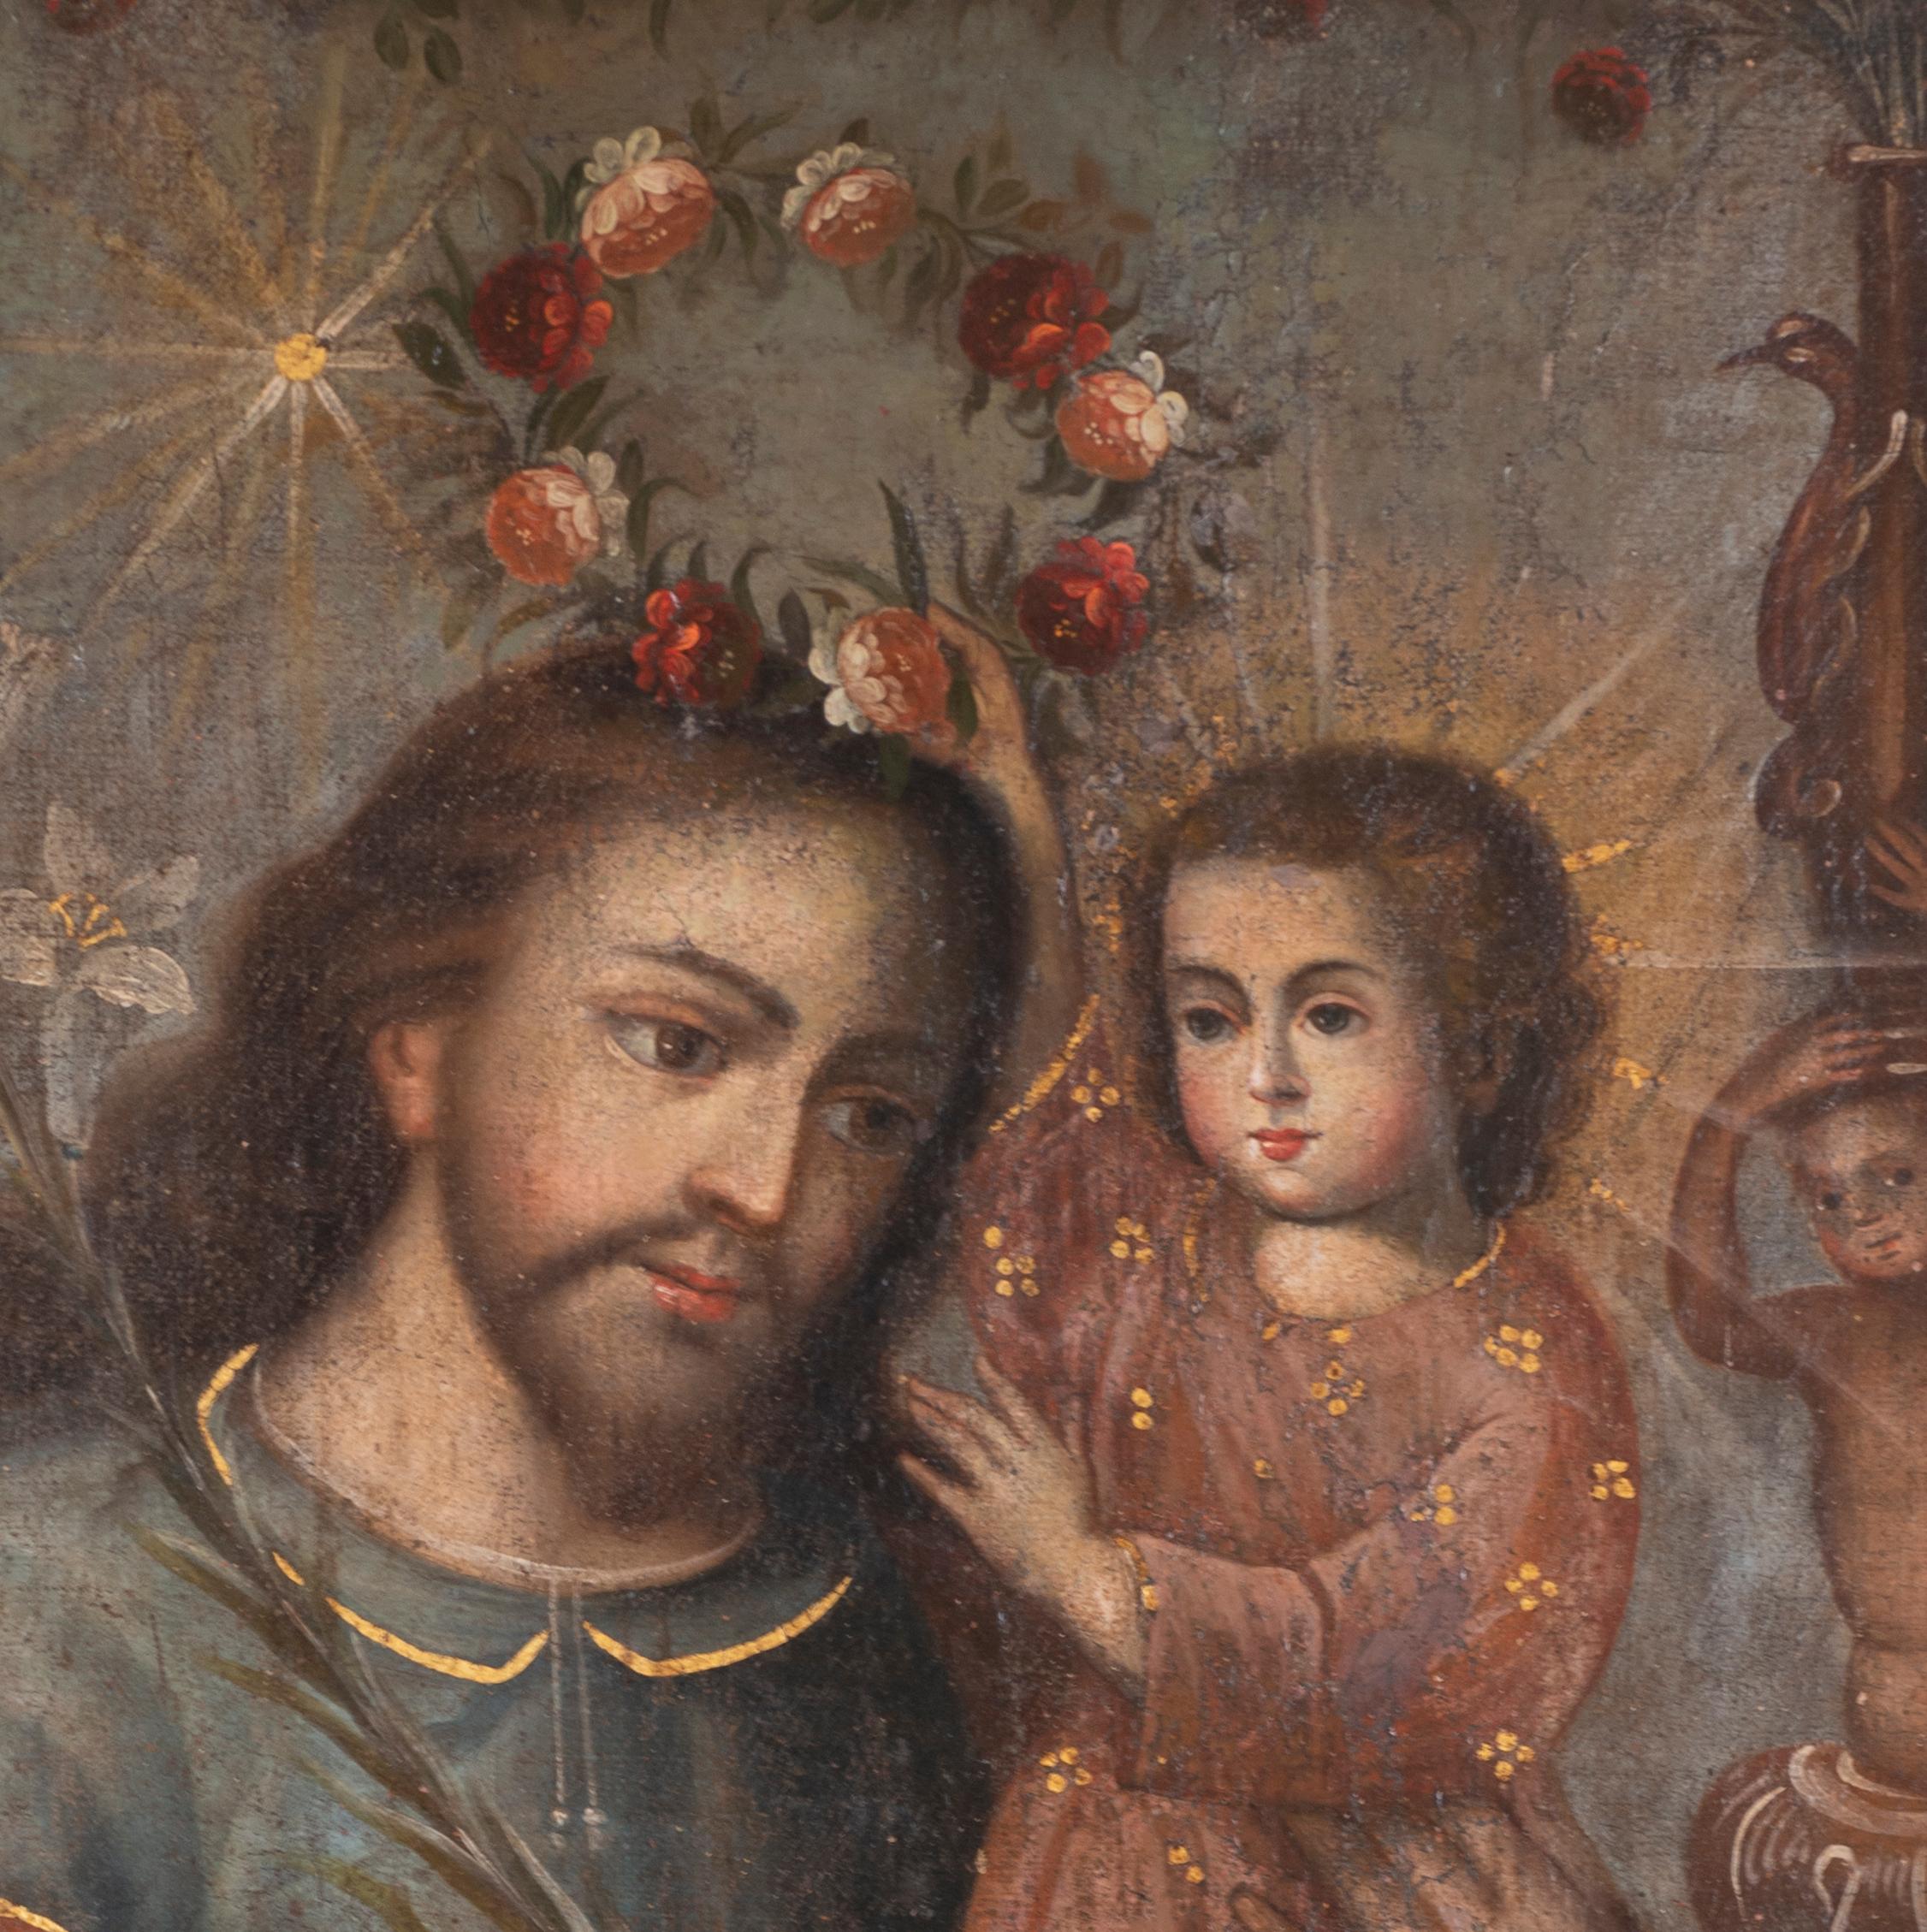 This Cuzqueño painting depicts Saint Joseph with the Christ child. The framed dimensions are 35 x 29 inches.